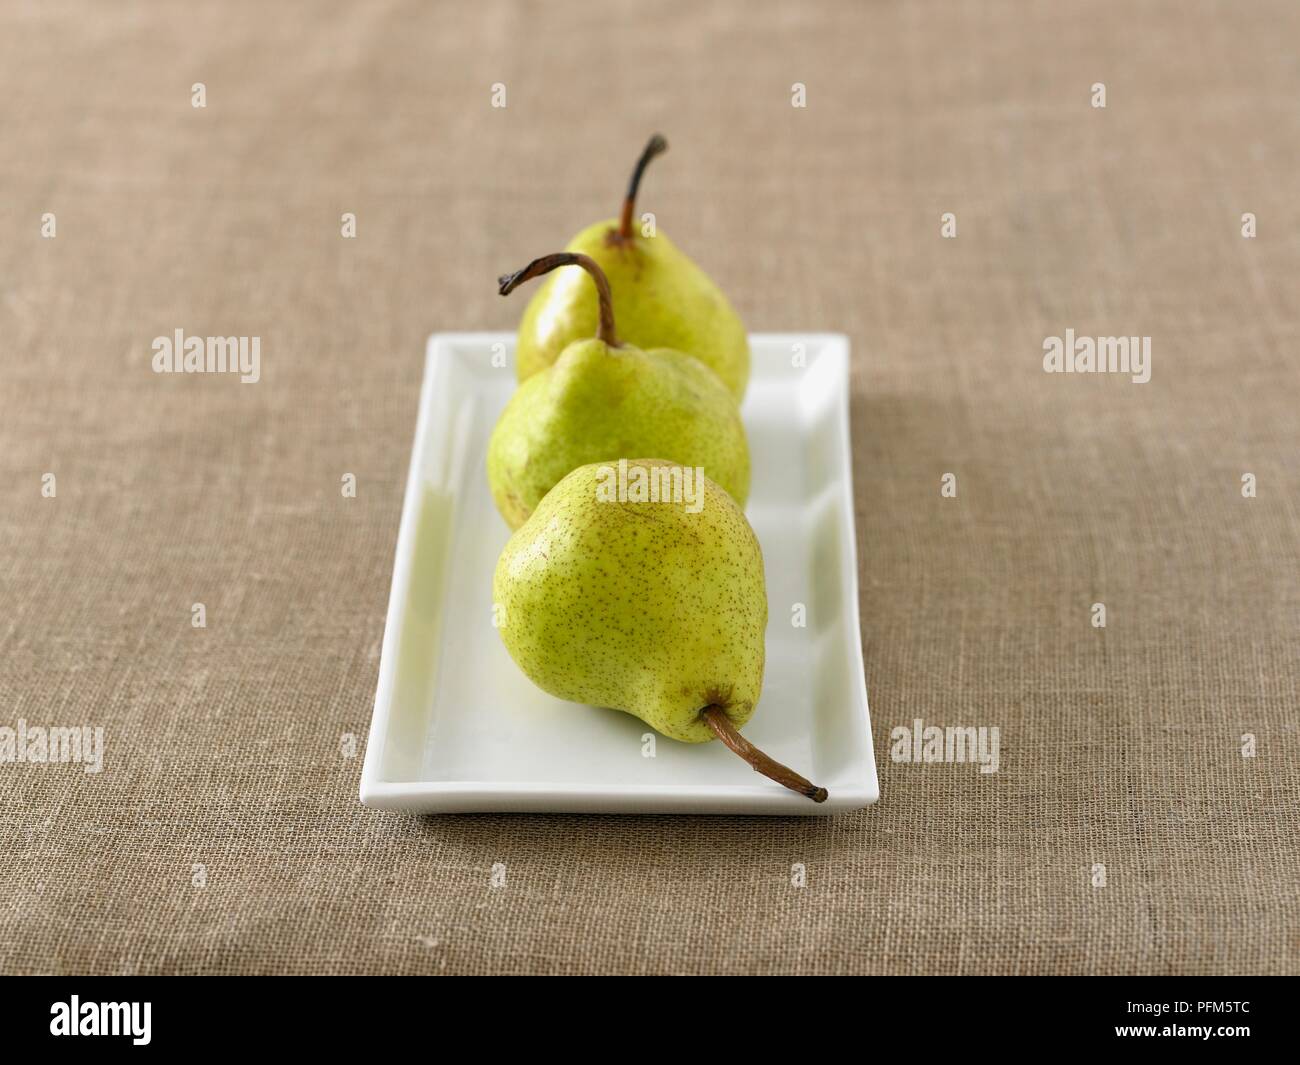 Three pears on a rectangular plate Stock Photo